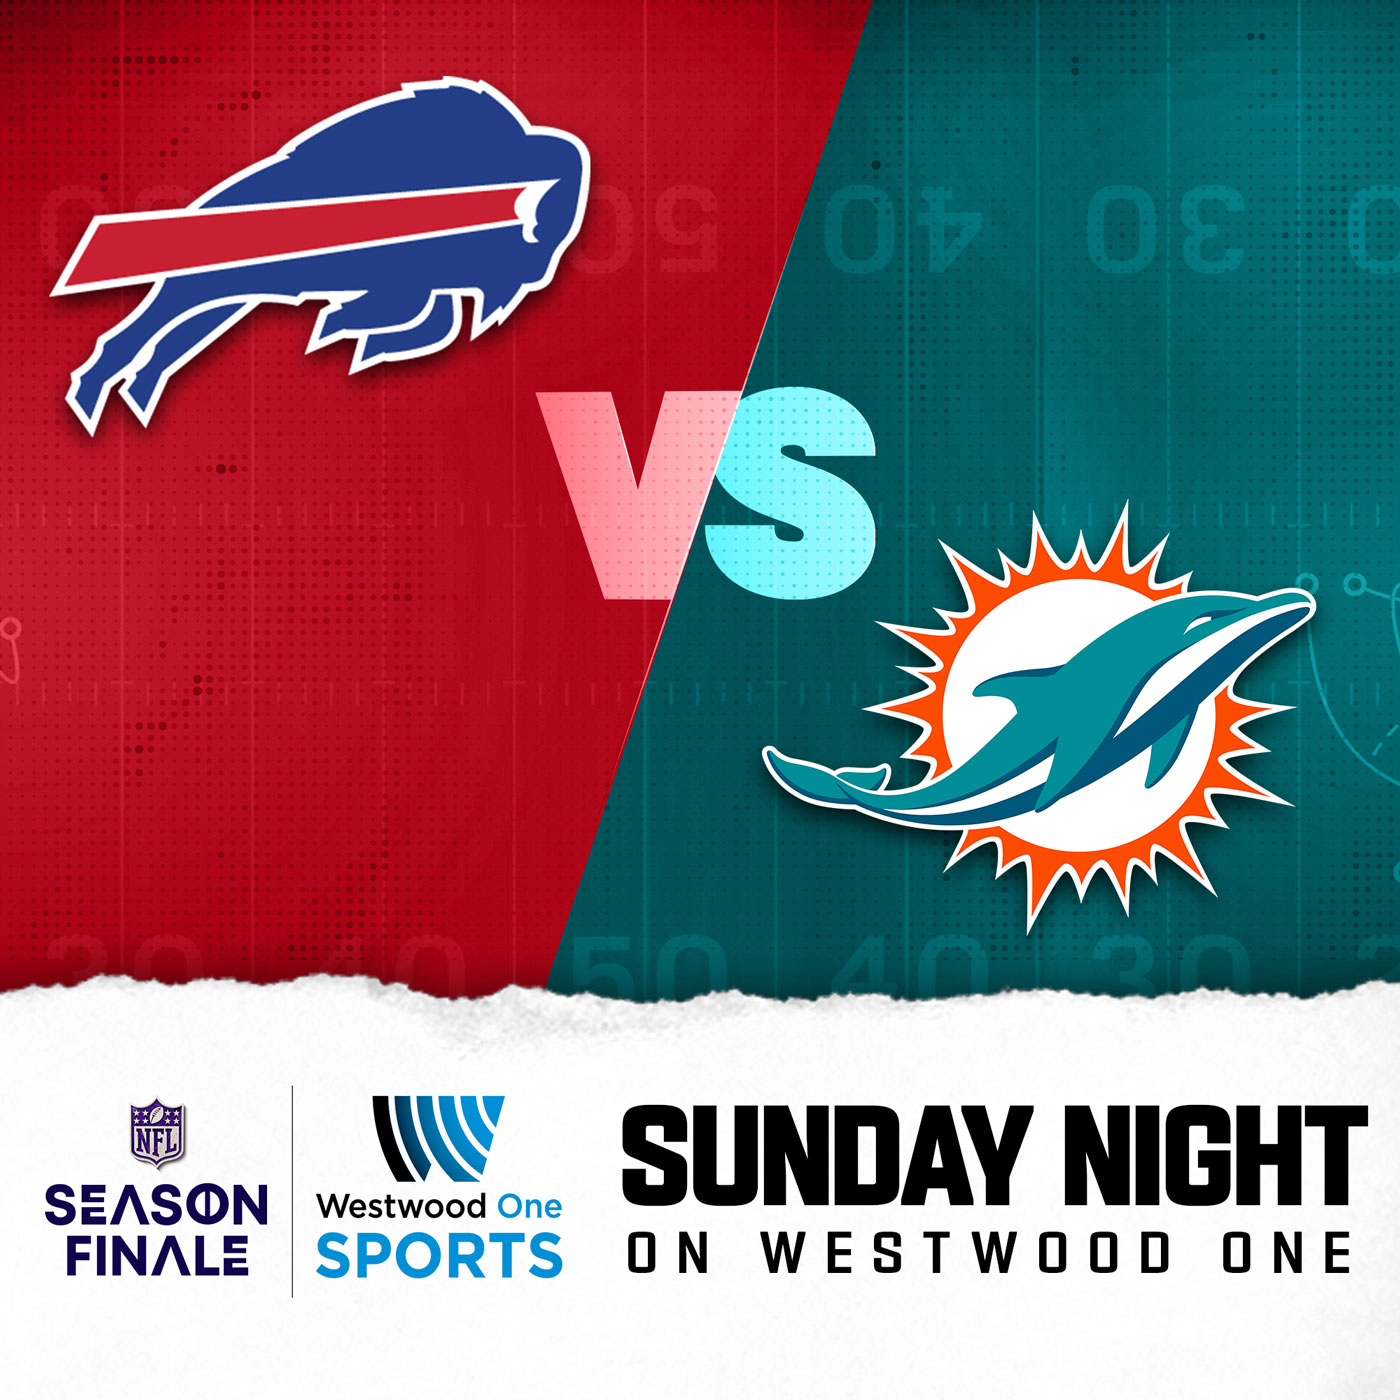 MIA 14-7 Dolphins Stop Bills at Goal Line to End 1st Half